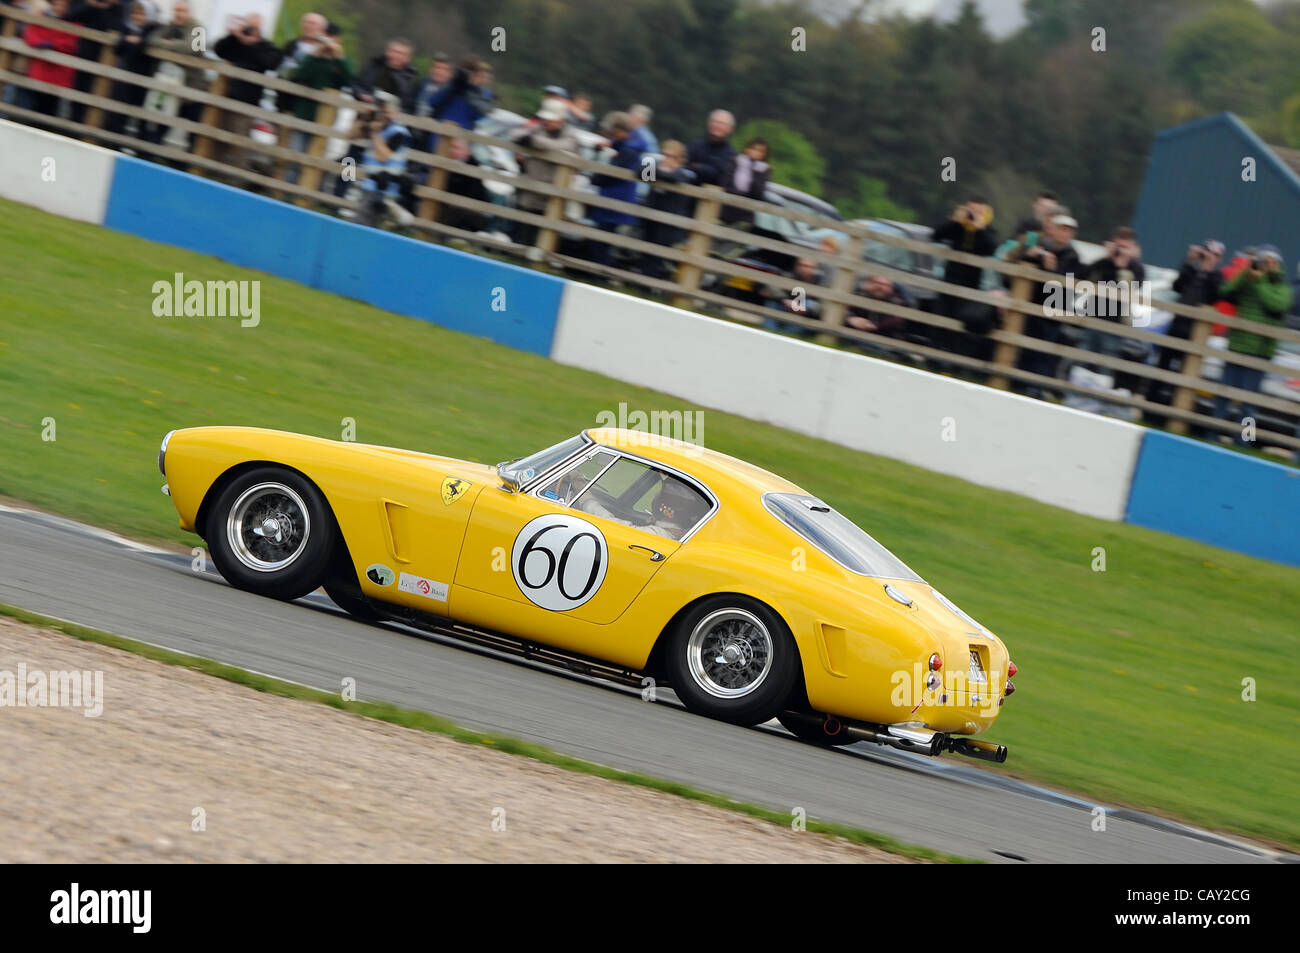 6th May 2012, Donington Park Racing Circuit, UK.  The Ferrari 250 SWB of Jackie Oliver and Gary Pearson at the Donington Historic Festival. Stock Photo